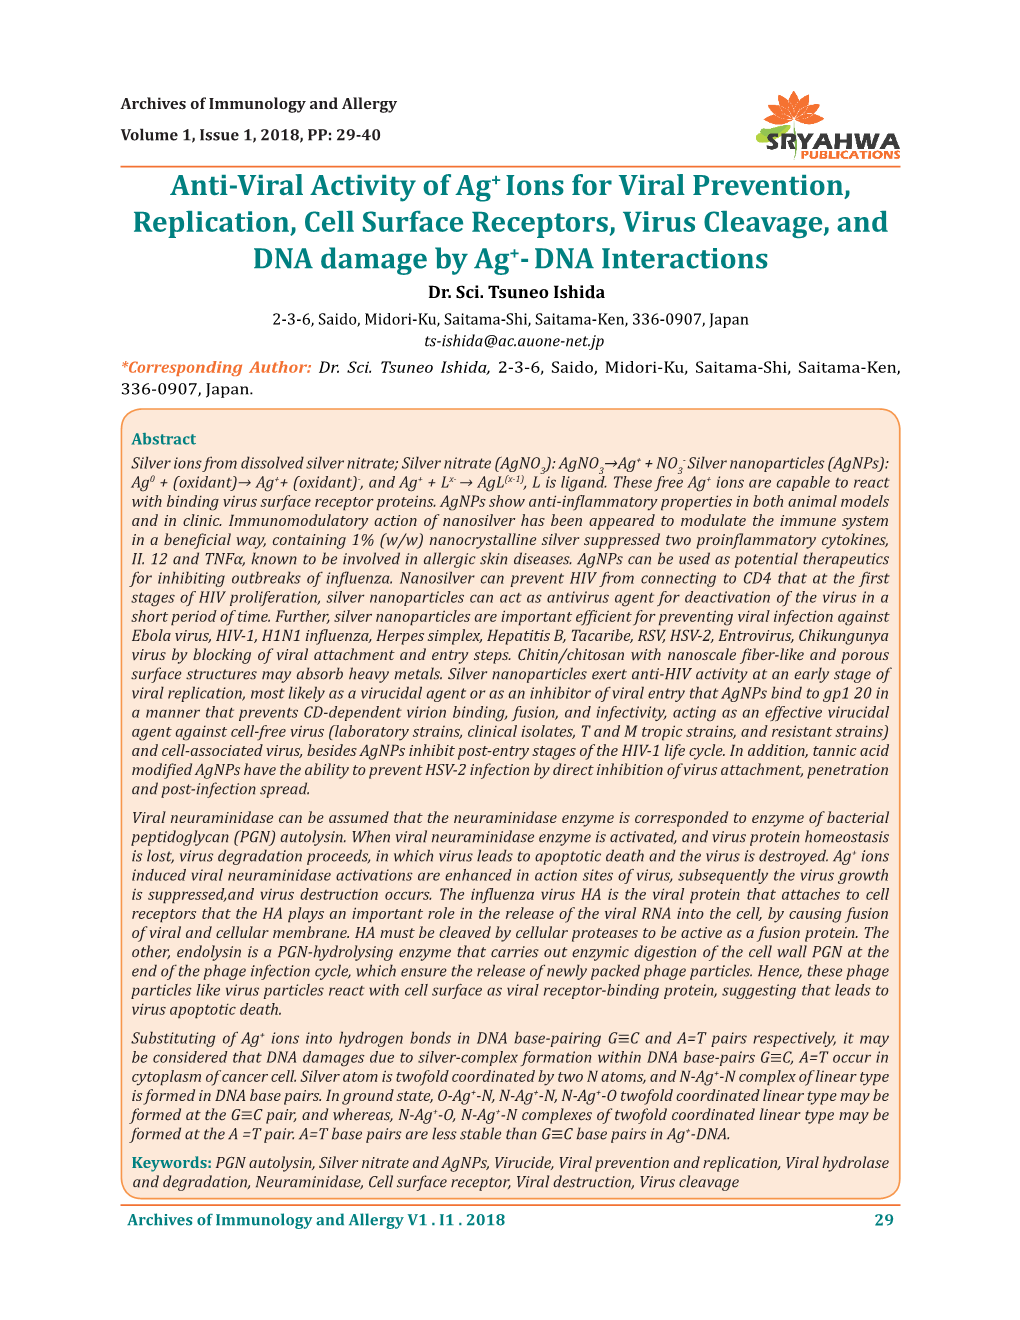 Anti-Viral Activity of Ag+ Ions for Viral Prevention, Replication, Cell Surface Receptors, Virus Cleavage, and DNA Damage by Ag+- DNA Interactions Dr